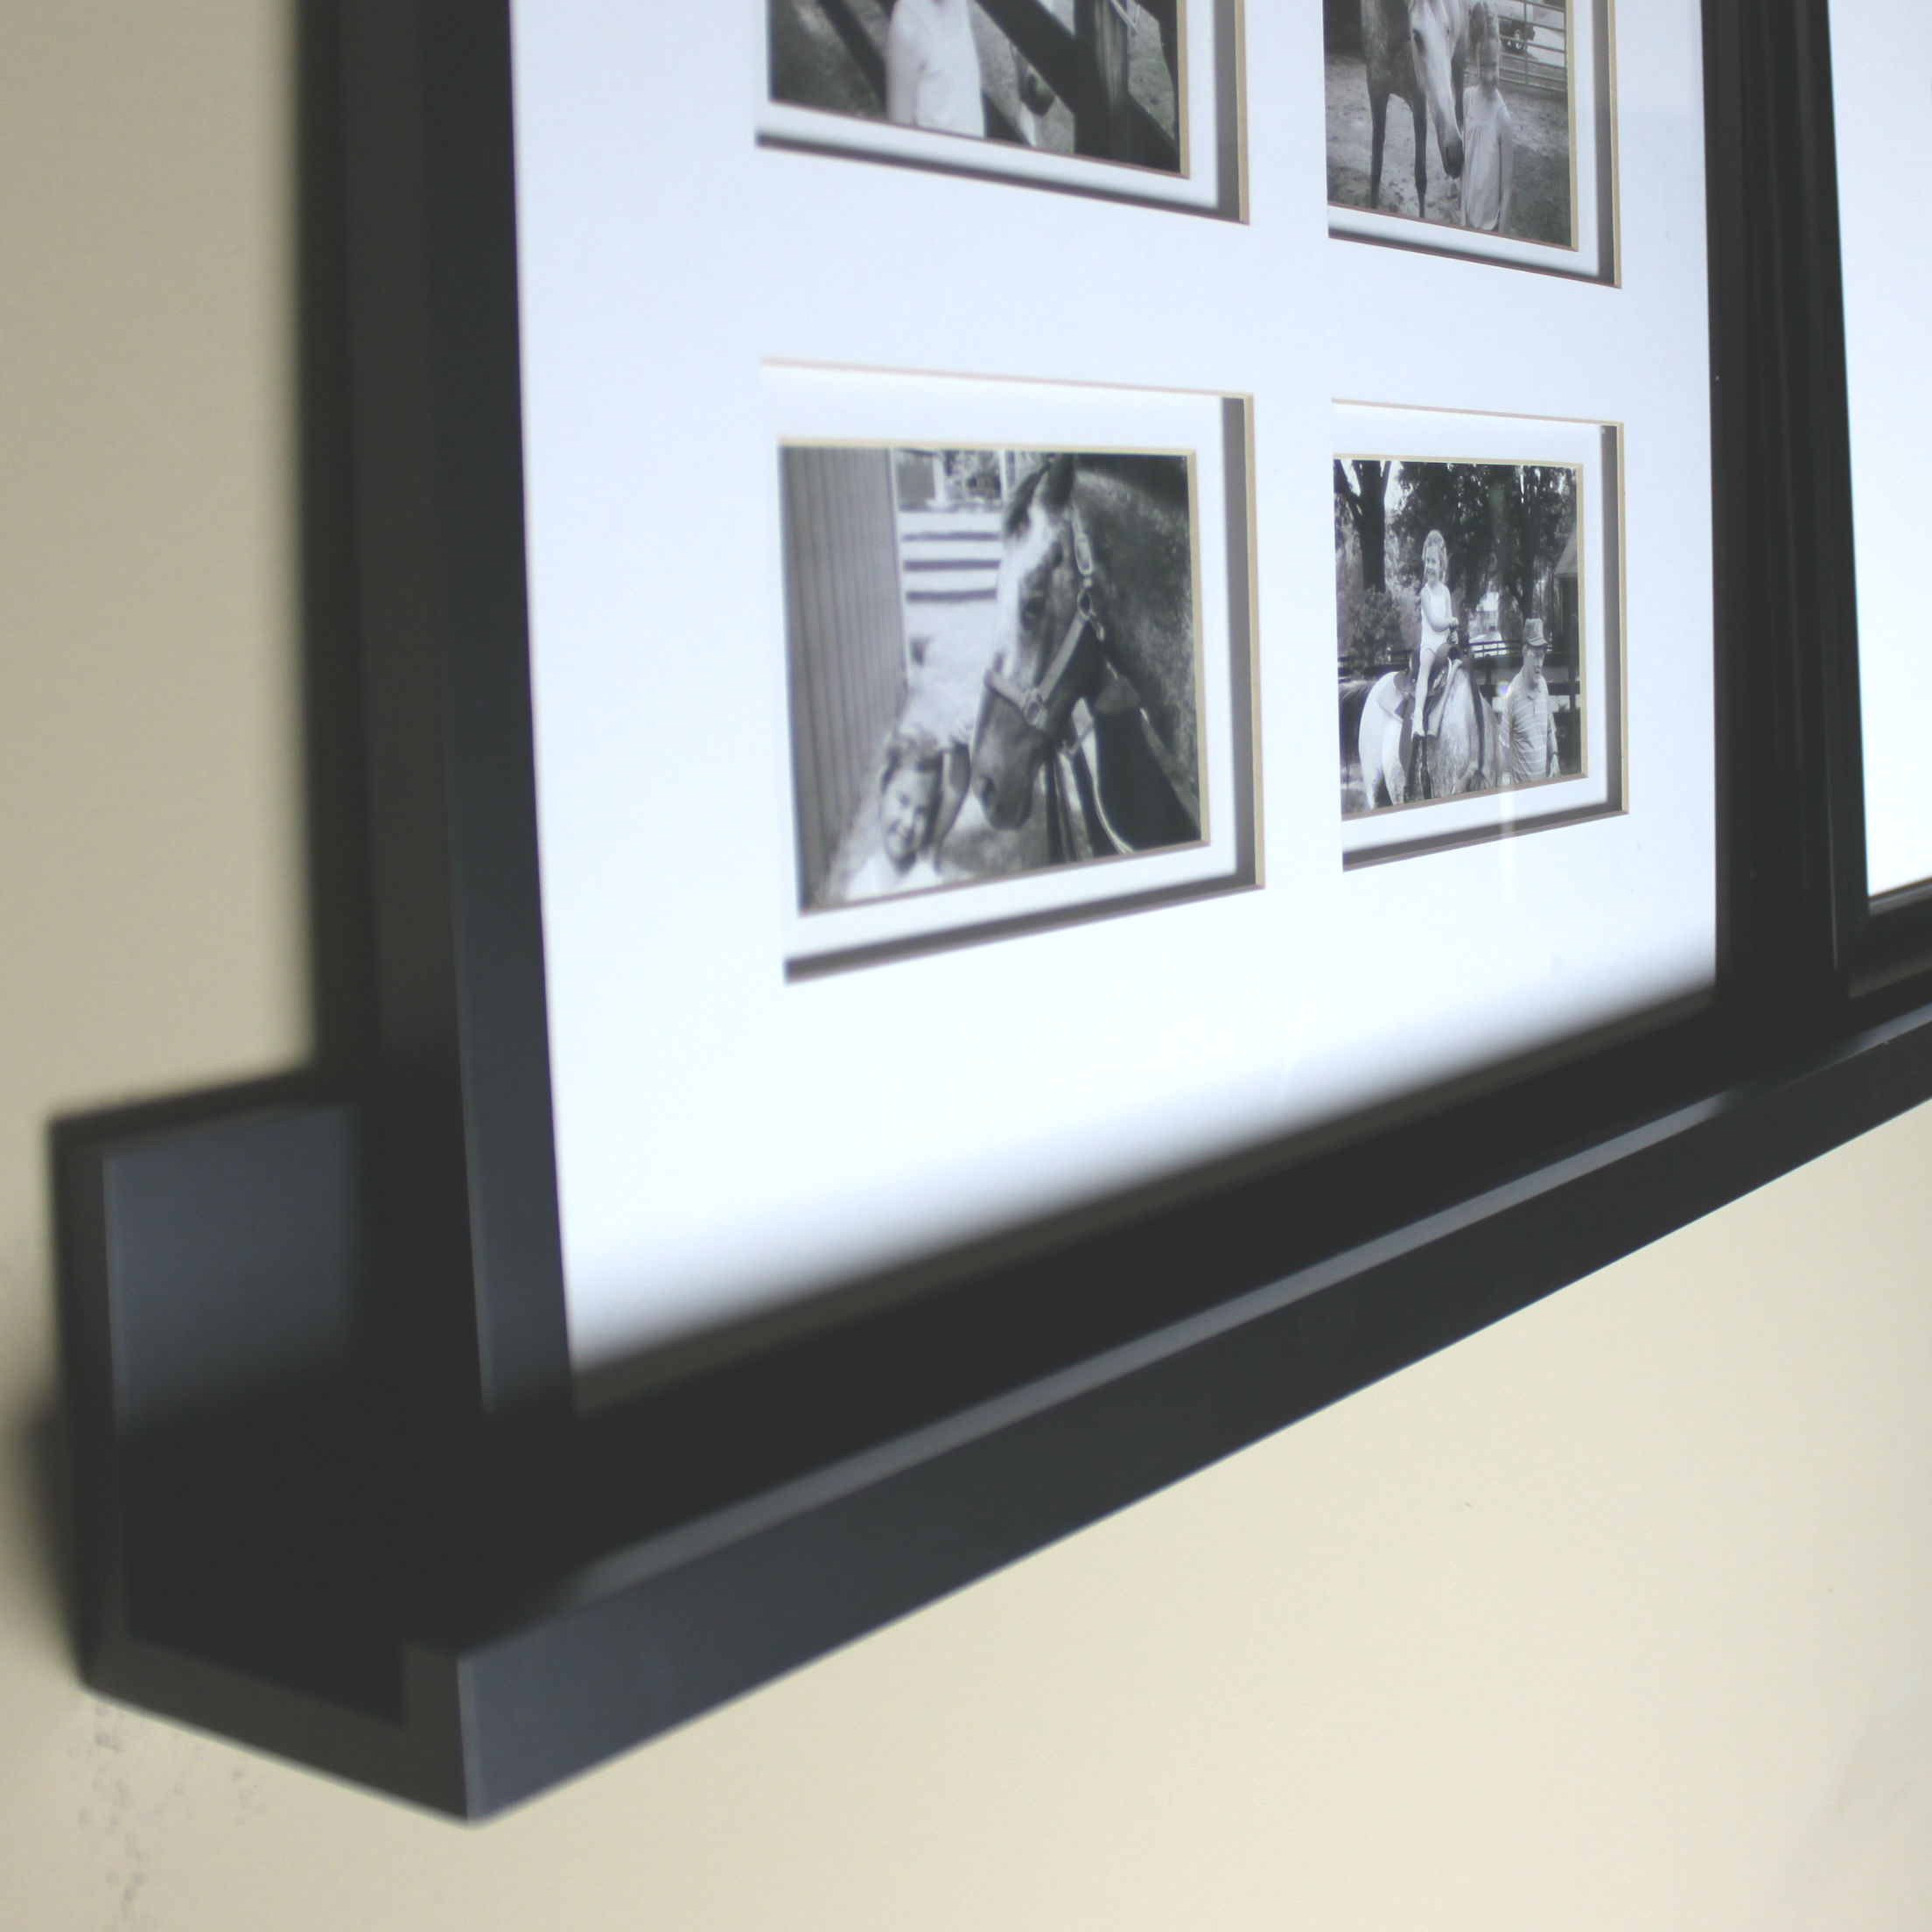 InPlace Rectangle Wood Floating Picture Ledge Wall Shelf One 23.6Wx4.5Dx3.5H Black - image 3 of 4